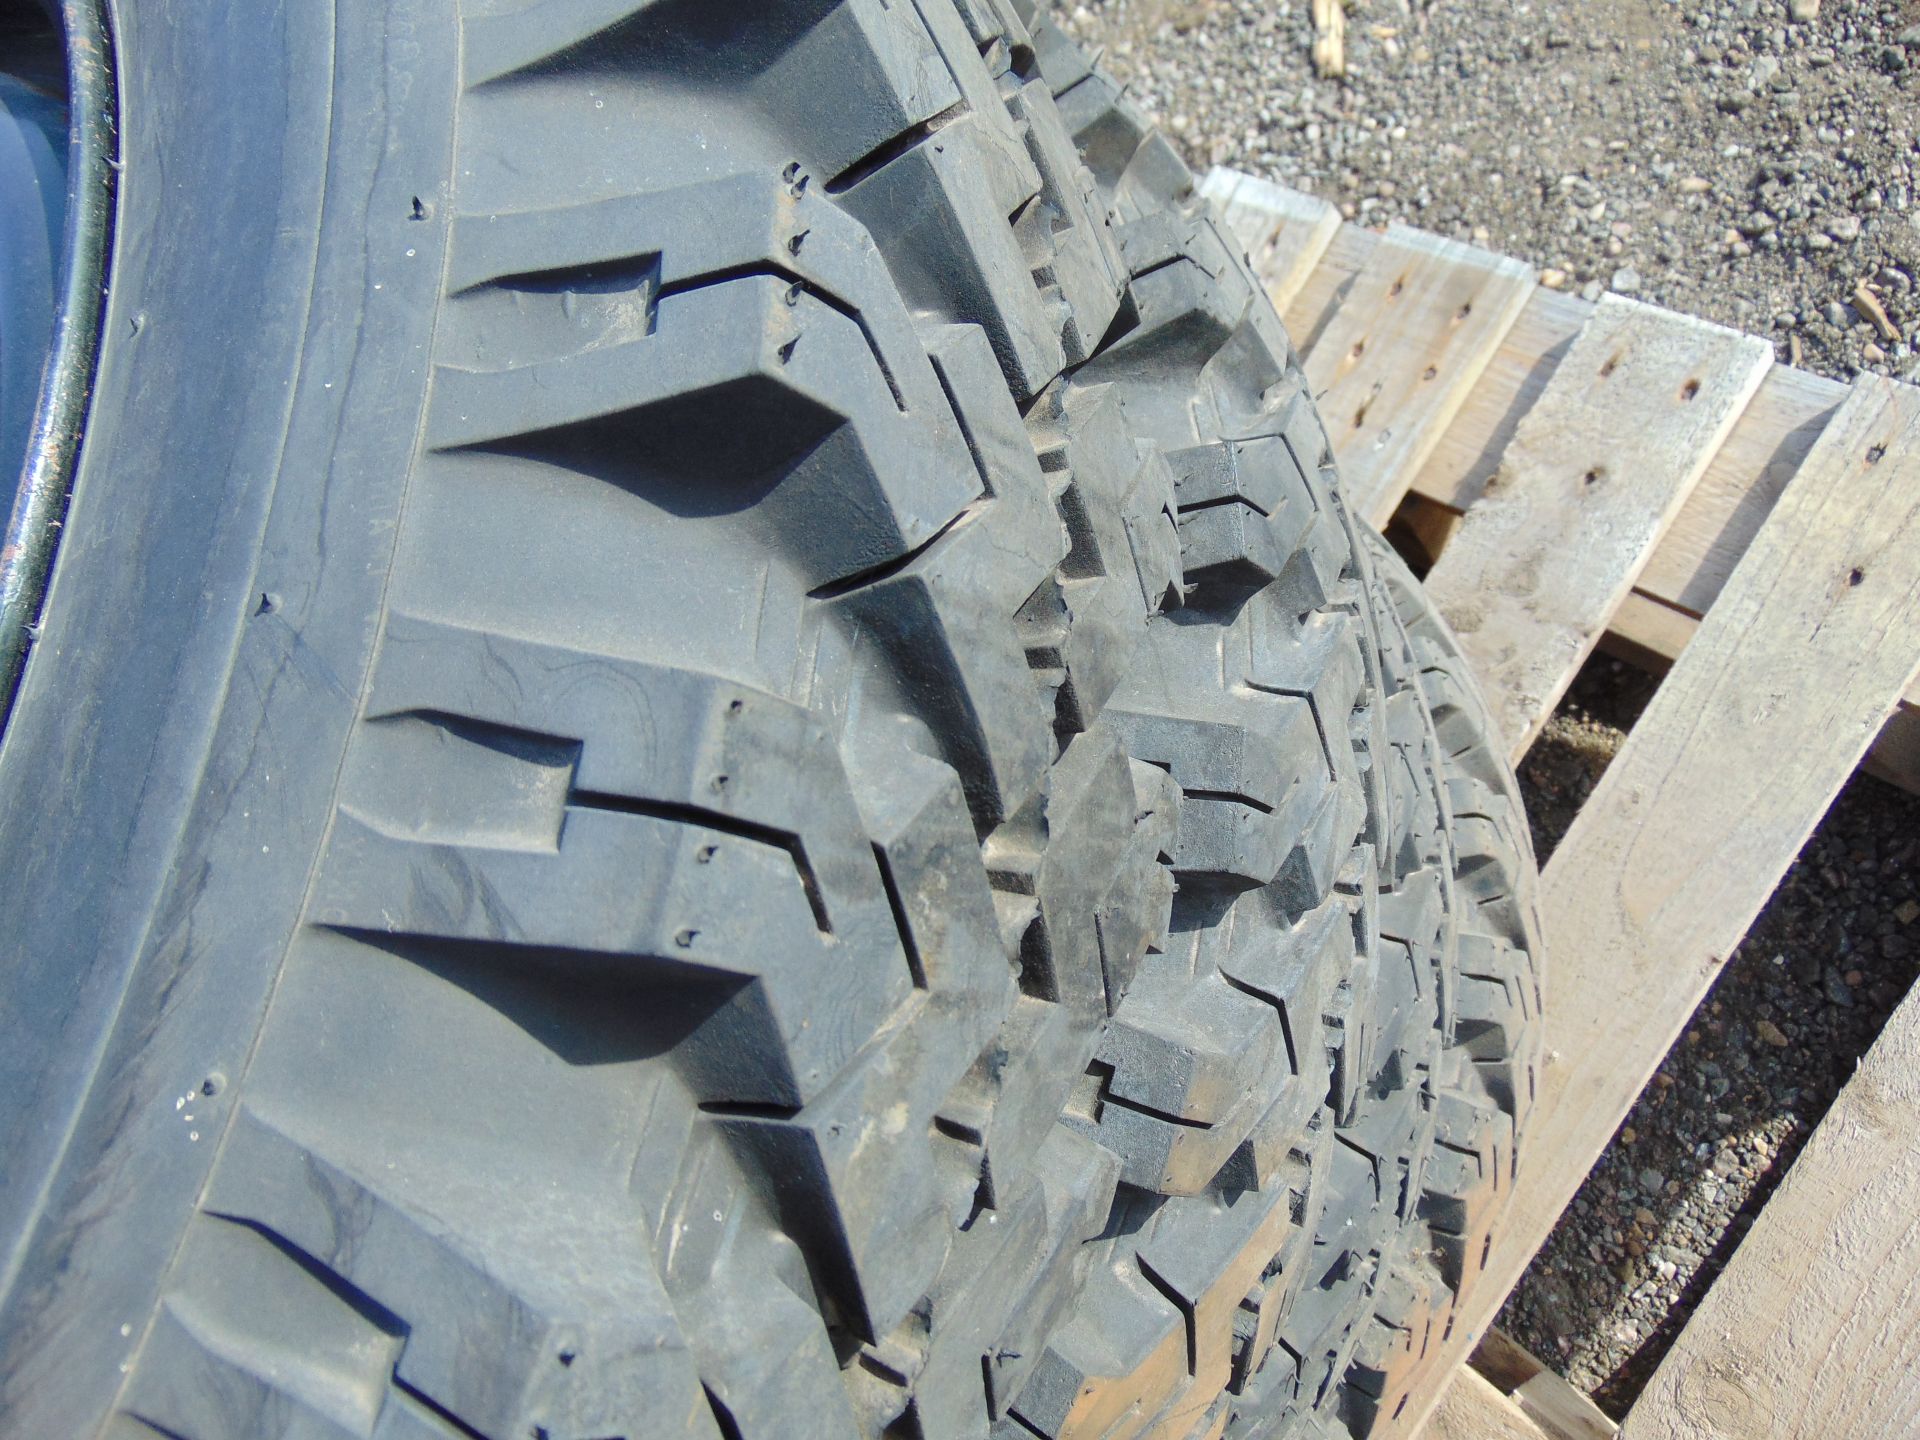 4 x Deestone Extra Traction 6.00-16 Tyres with 5 Stud Rims - Image 7 of 7